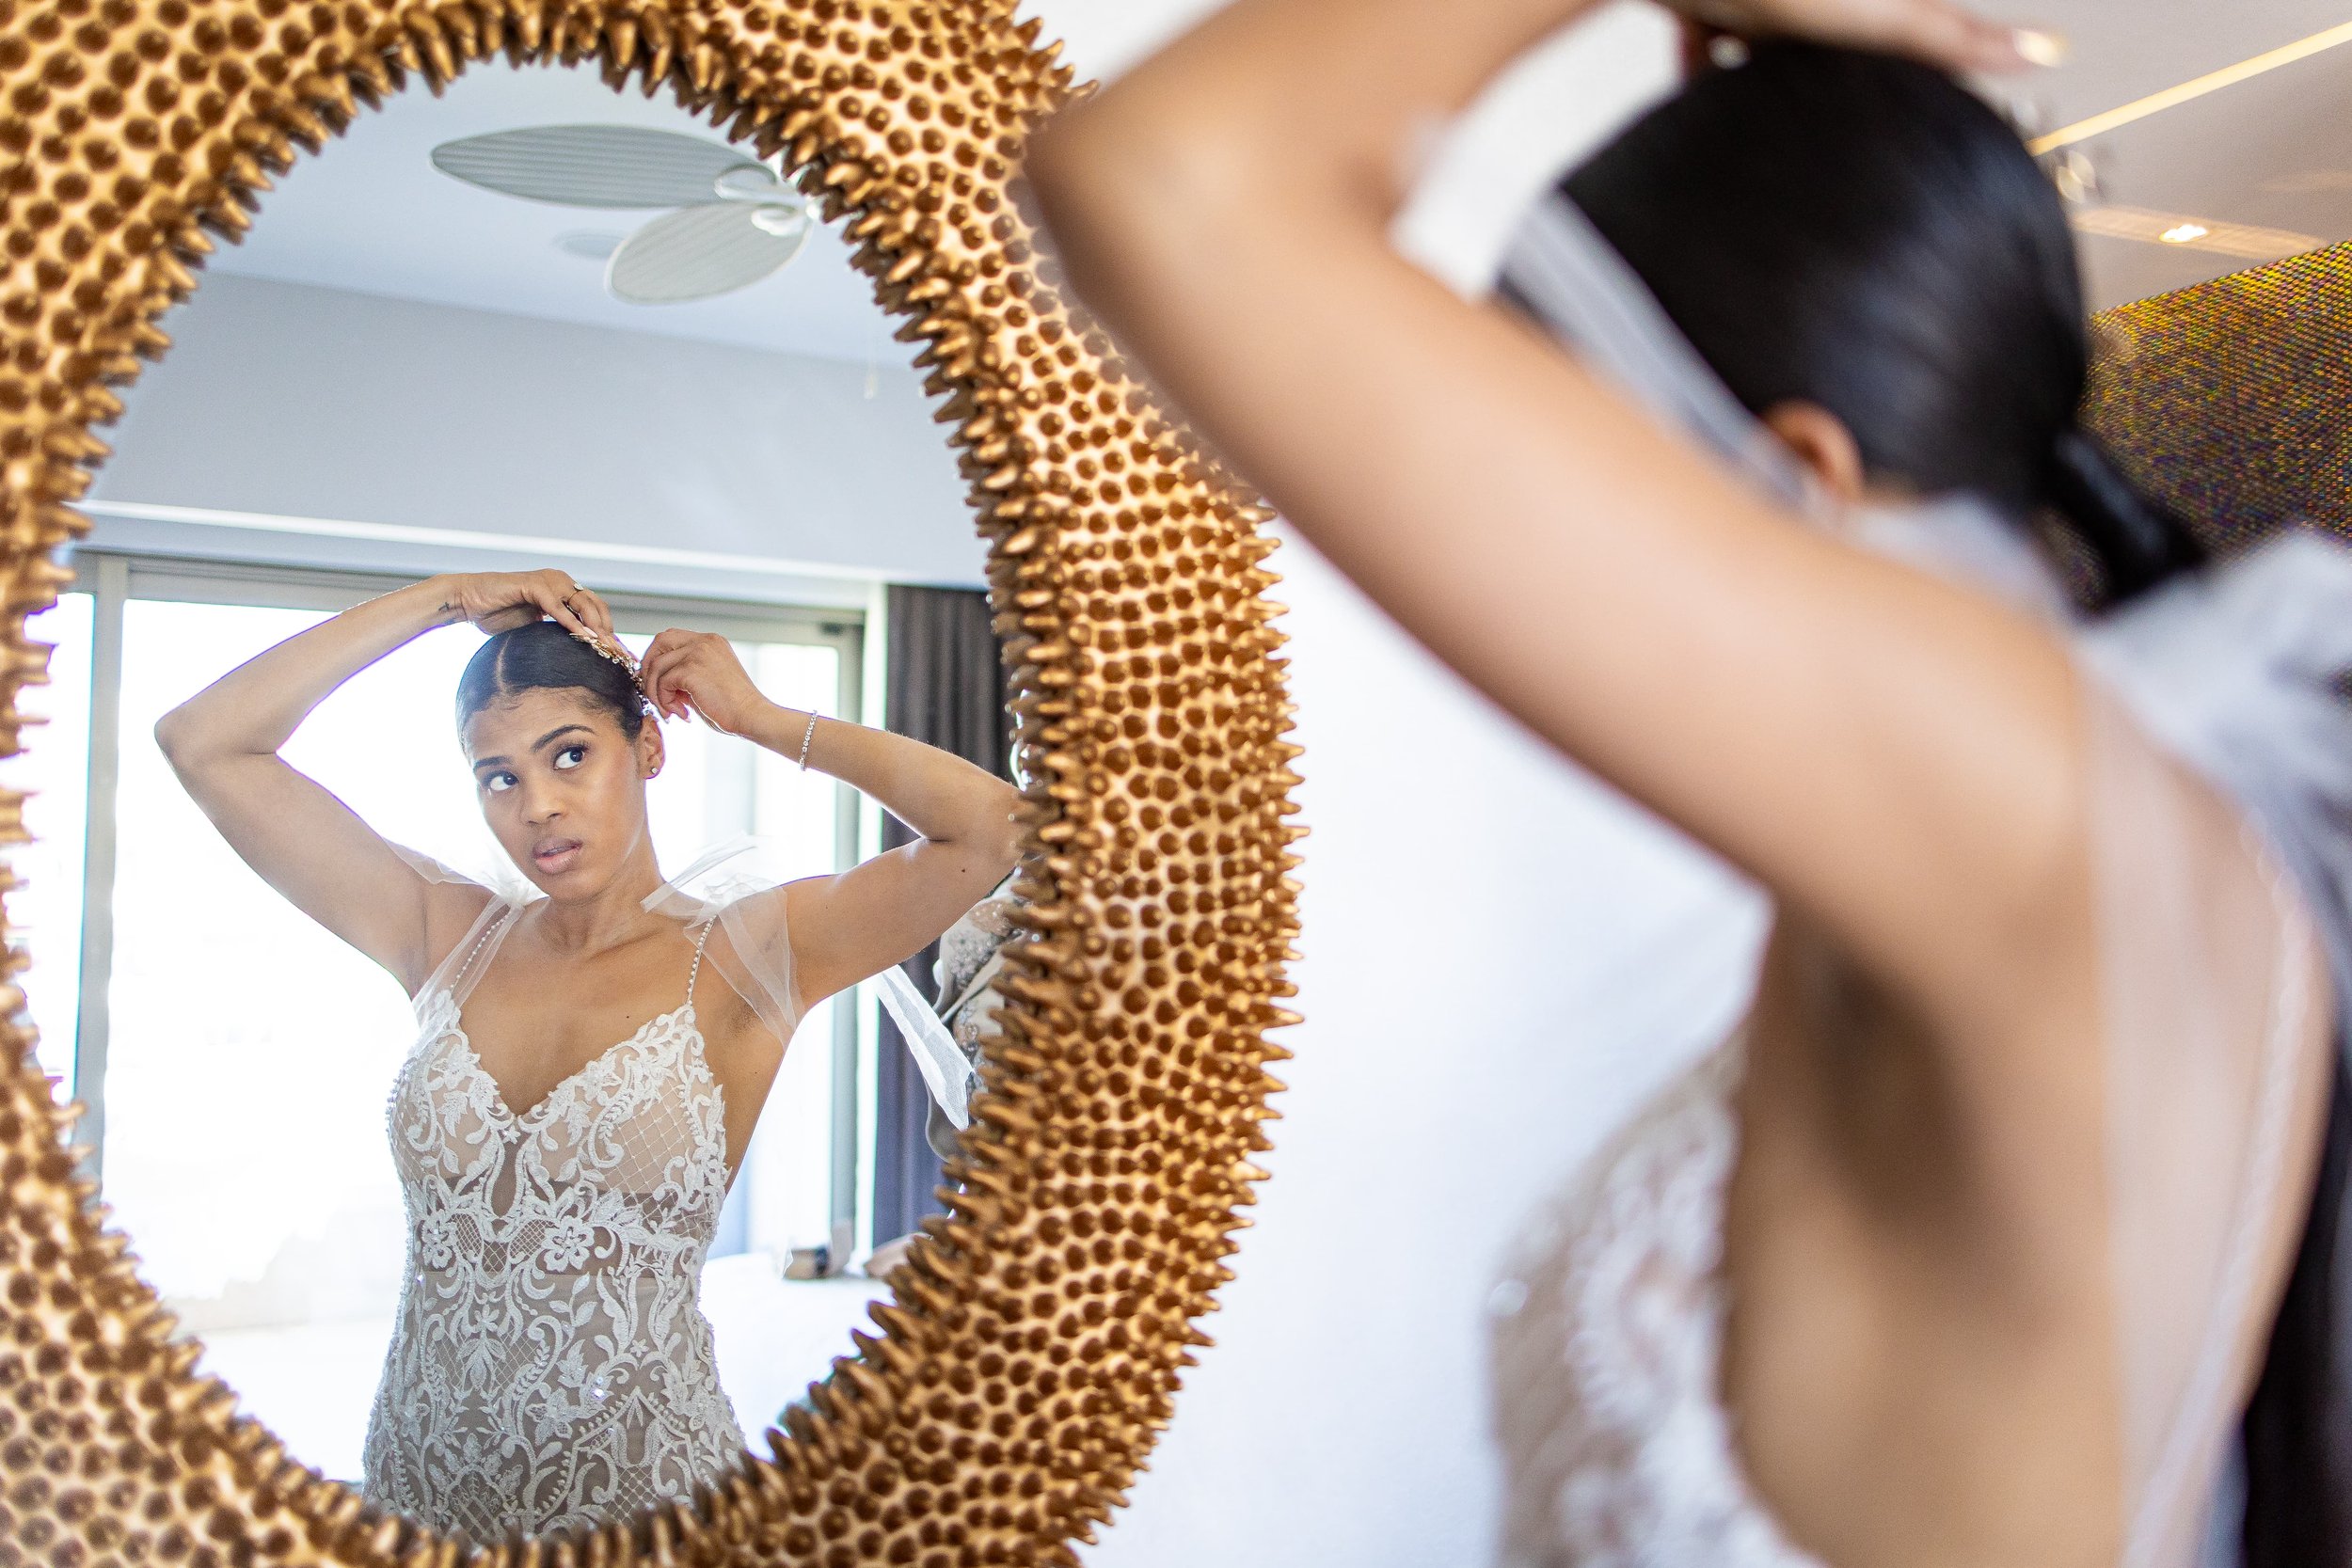  A woman in a detailed lace wedding gown adjusts her hair while looking into a round, ornate mirror in a brightly lit room. 